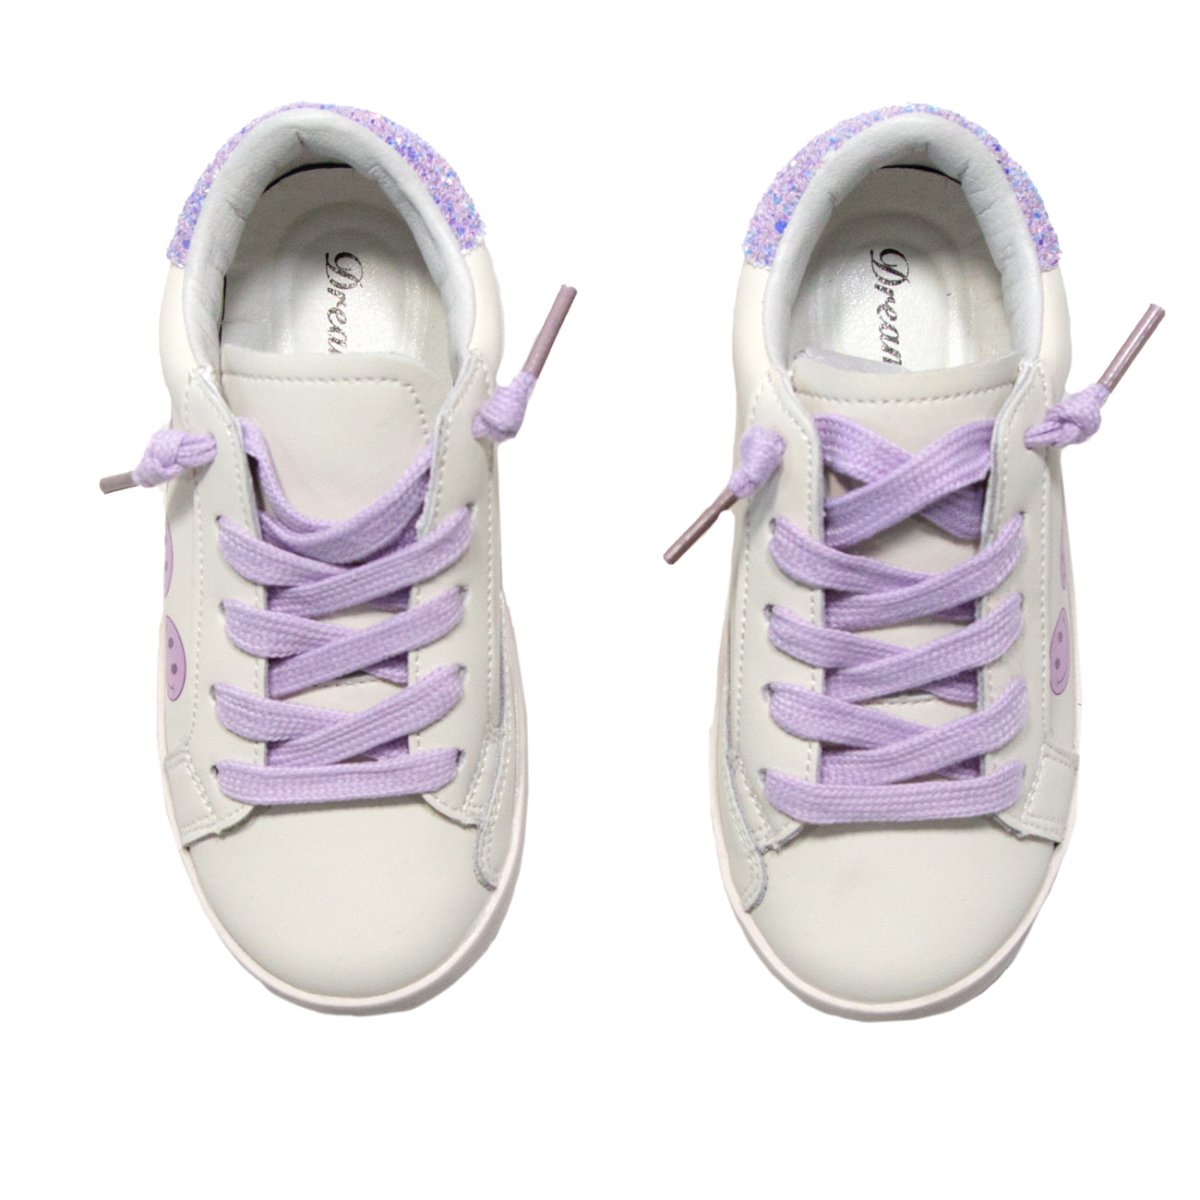 SMILEY FACE SNEAKERS - SNEAKERS